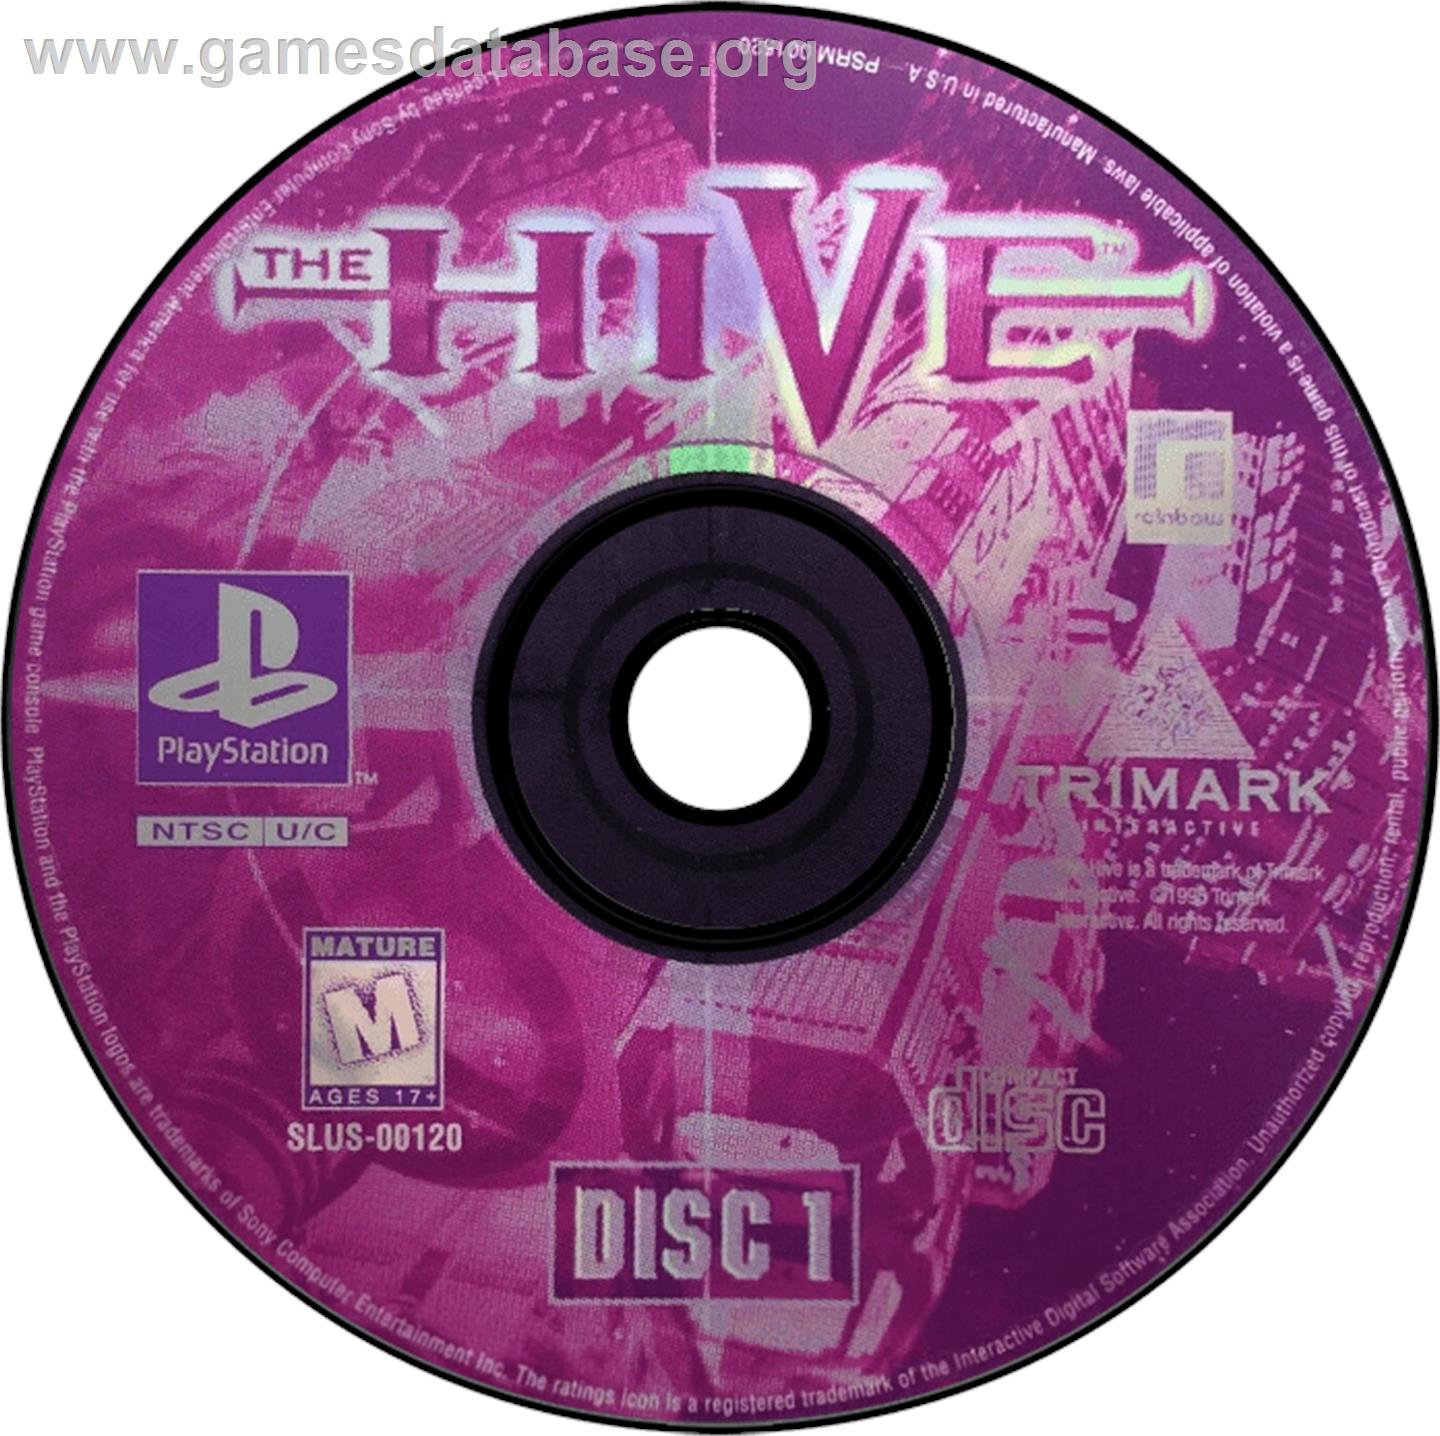 The Hive - Sony Playstation - Artwork - Disc